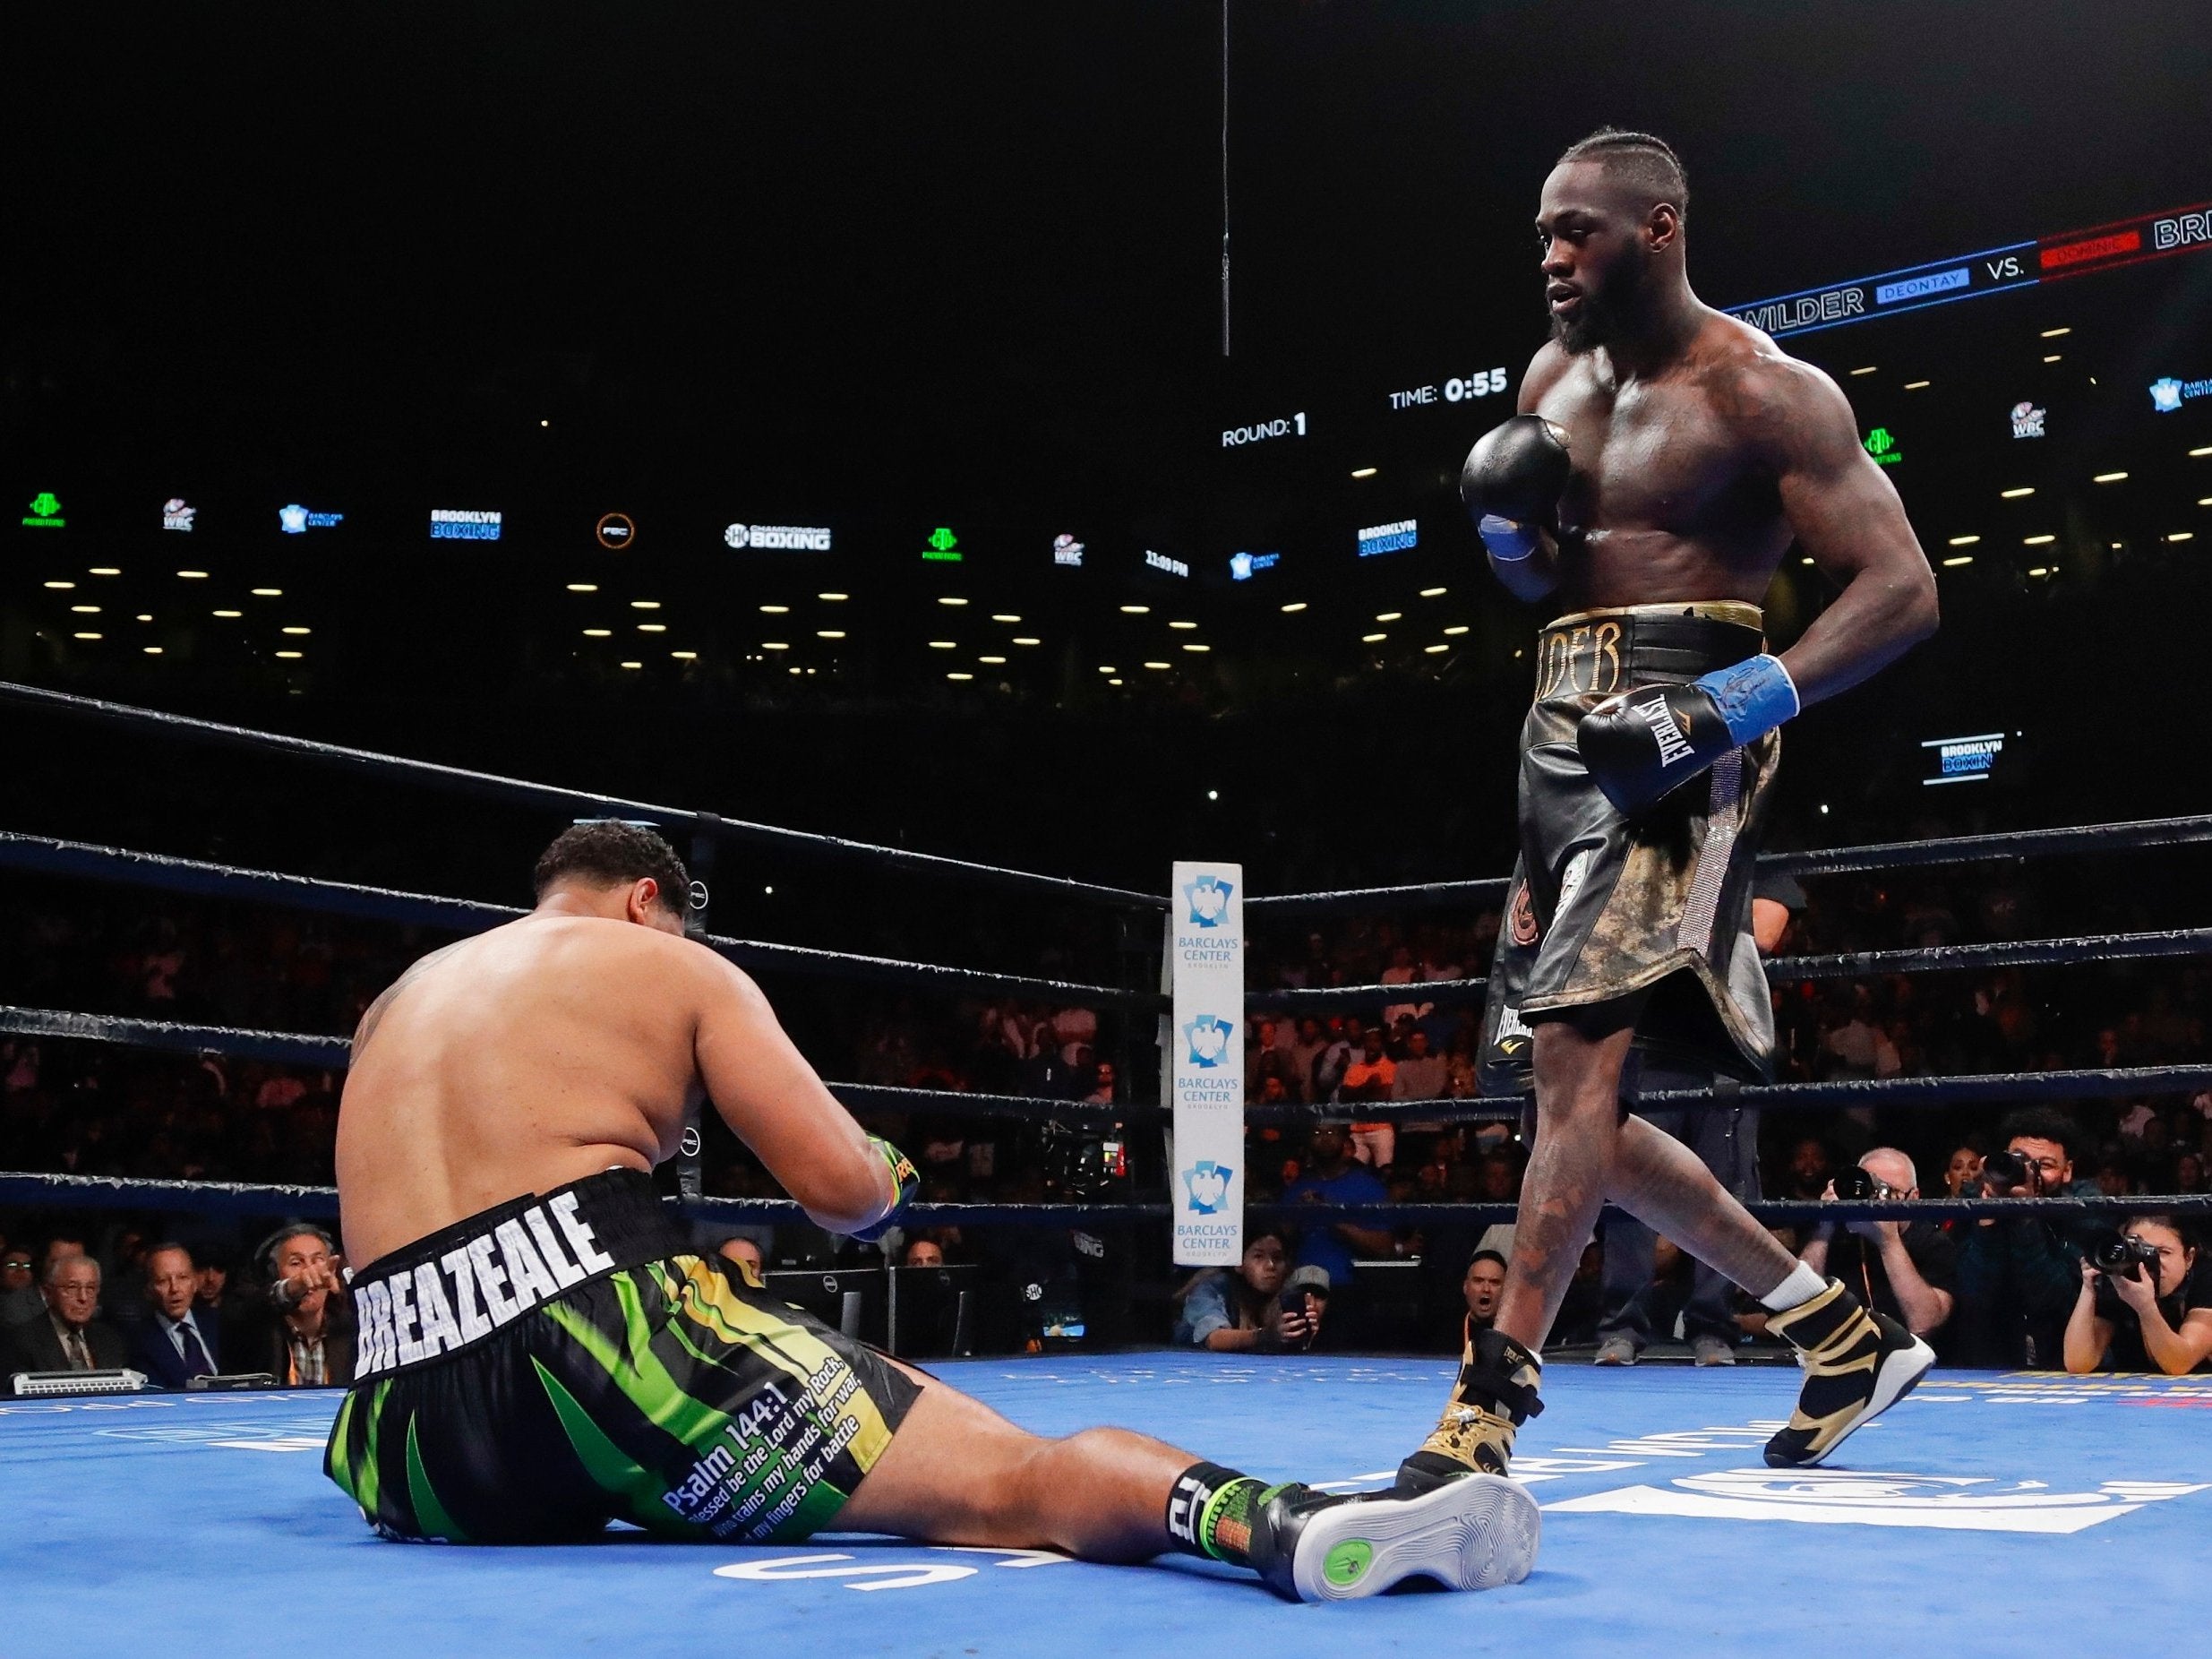 Wilder knocked out Breazeale in the first round of their heavyweight title contest